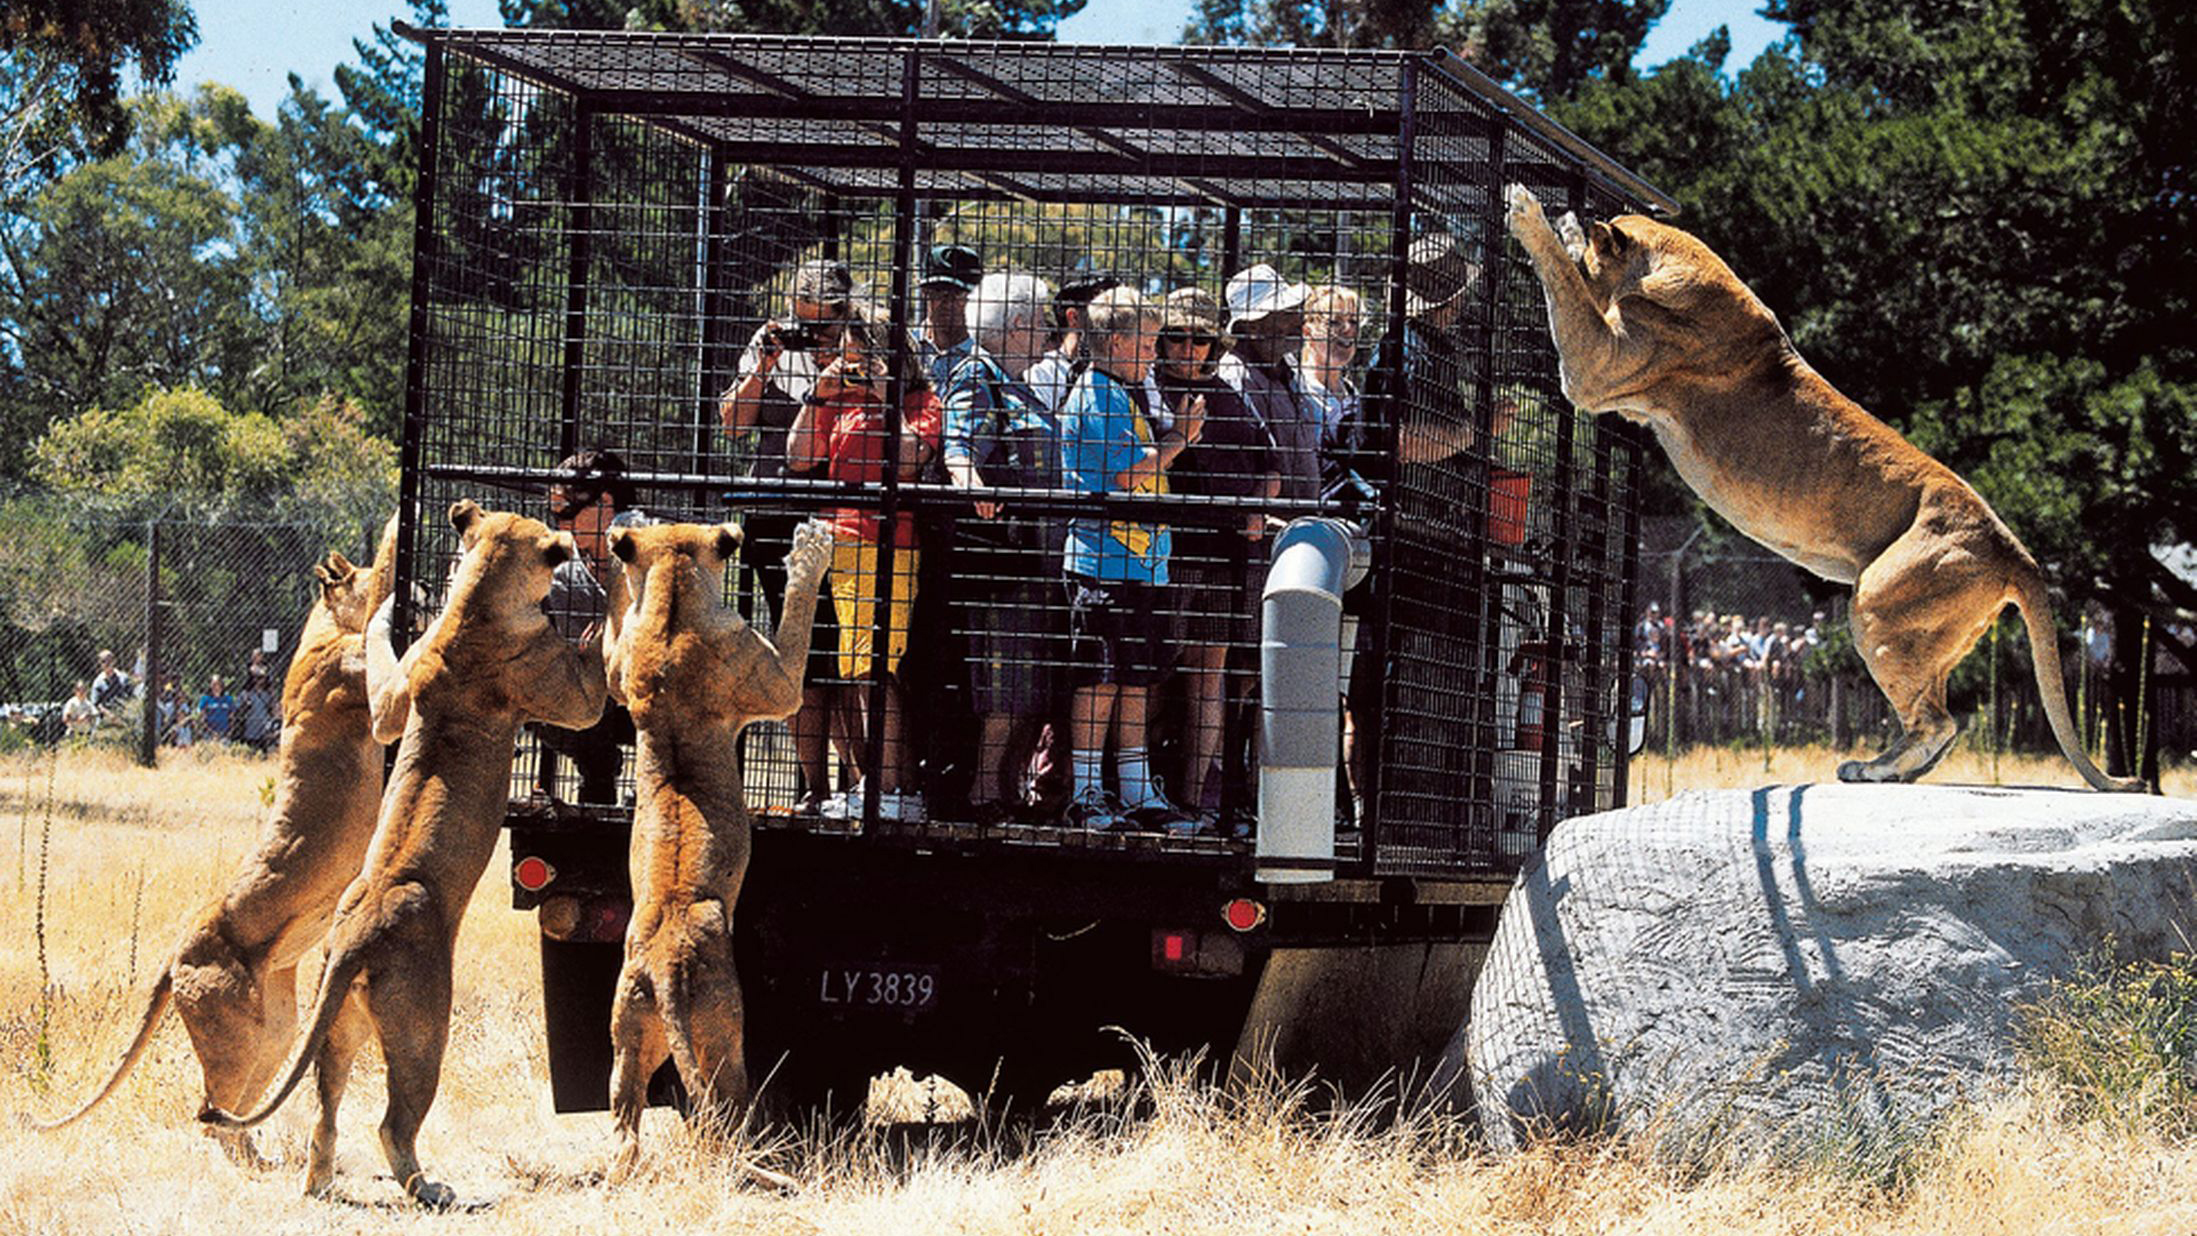  park in in agadir in the safari parc marrakech from